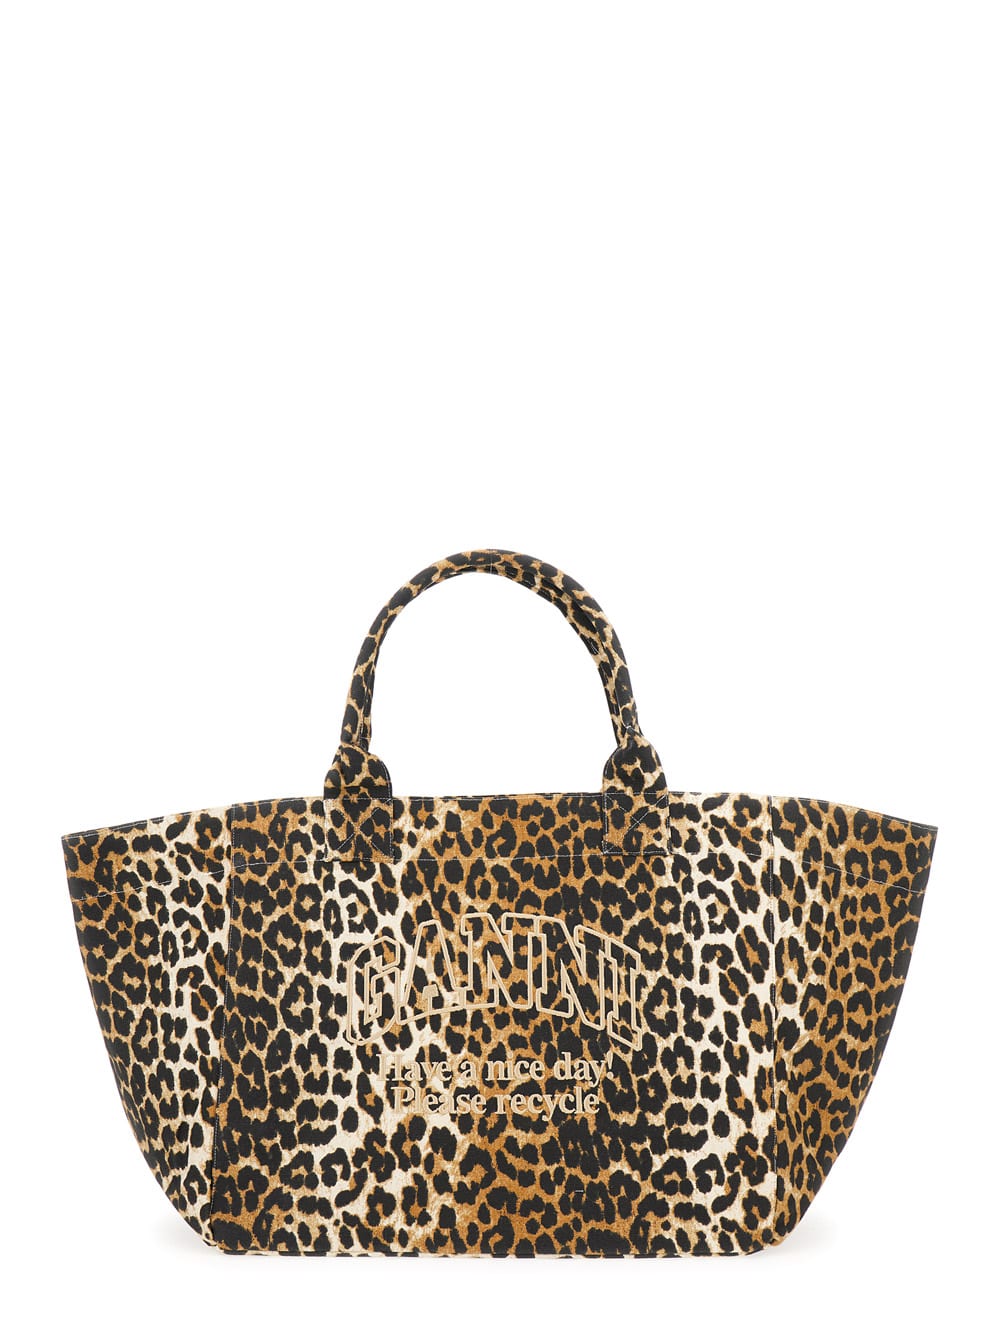 GANNI XXL BROWN TOTE BAG WITH LOGO EMBROIDERY AND LEOPARD PRINT IN RECYCLED COTTON WOMAN